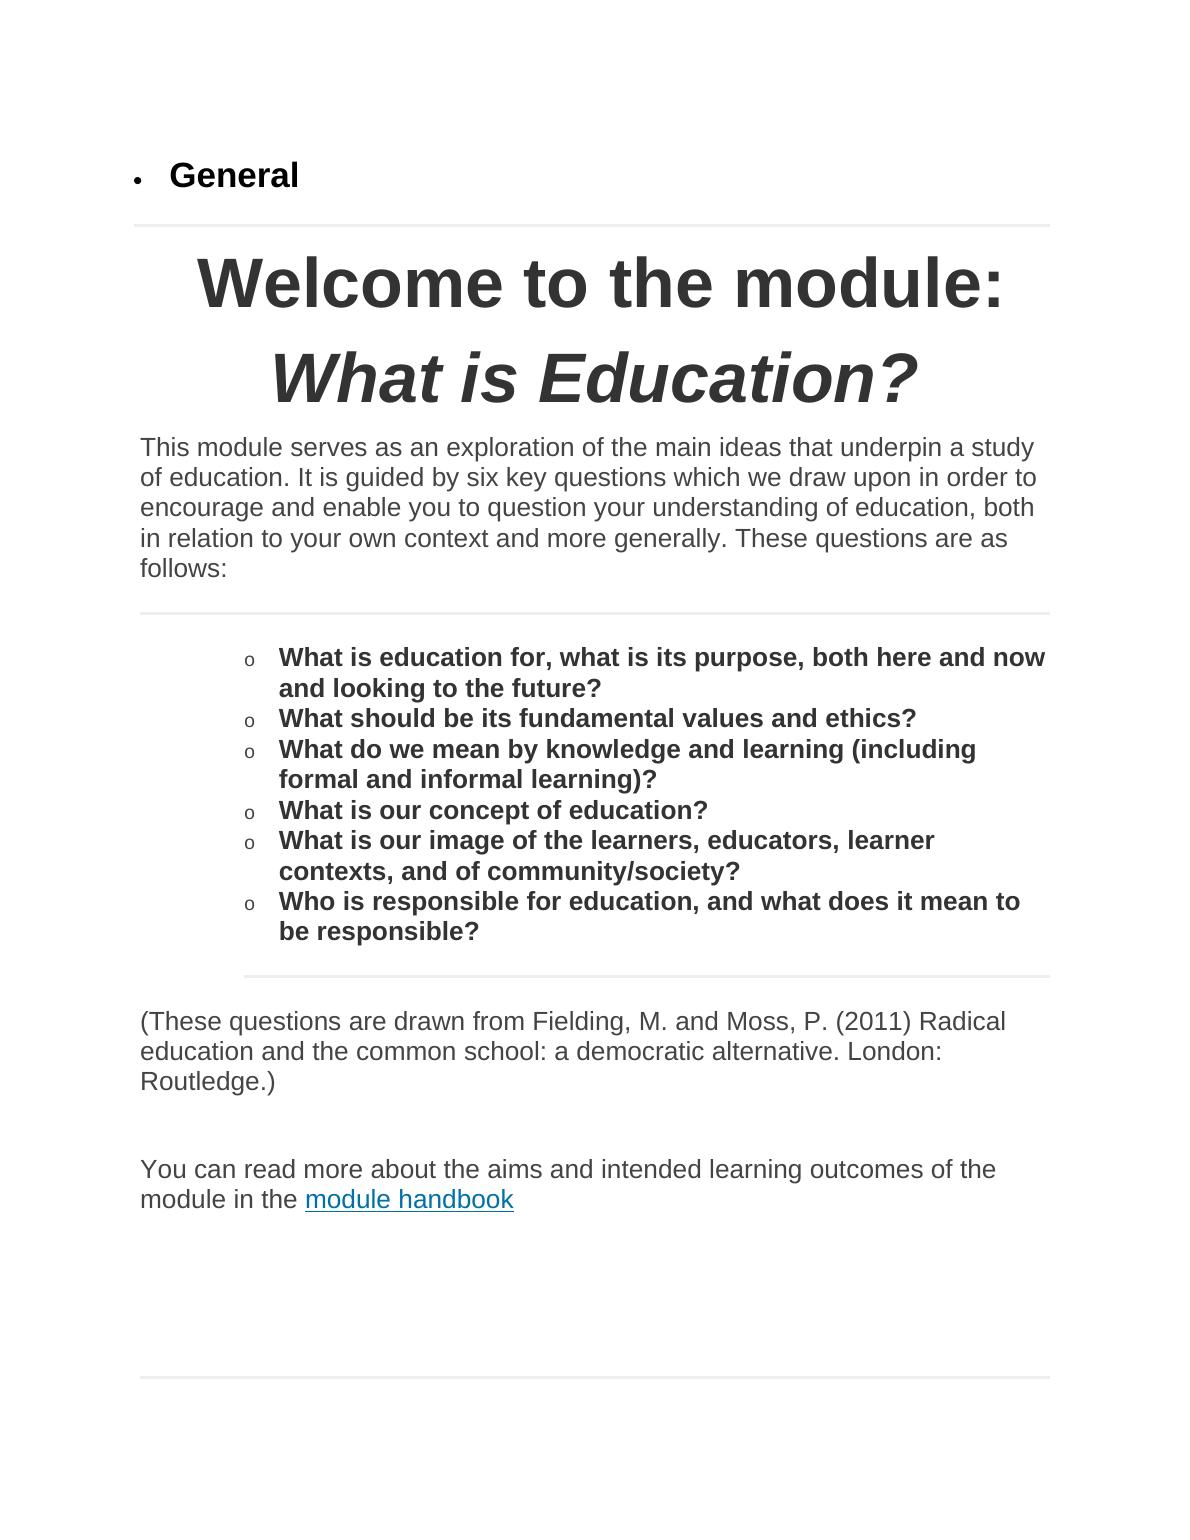 Module on Study of Education: Assignment_1